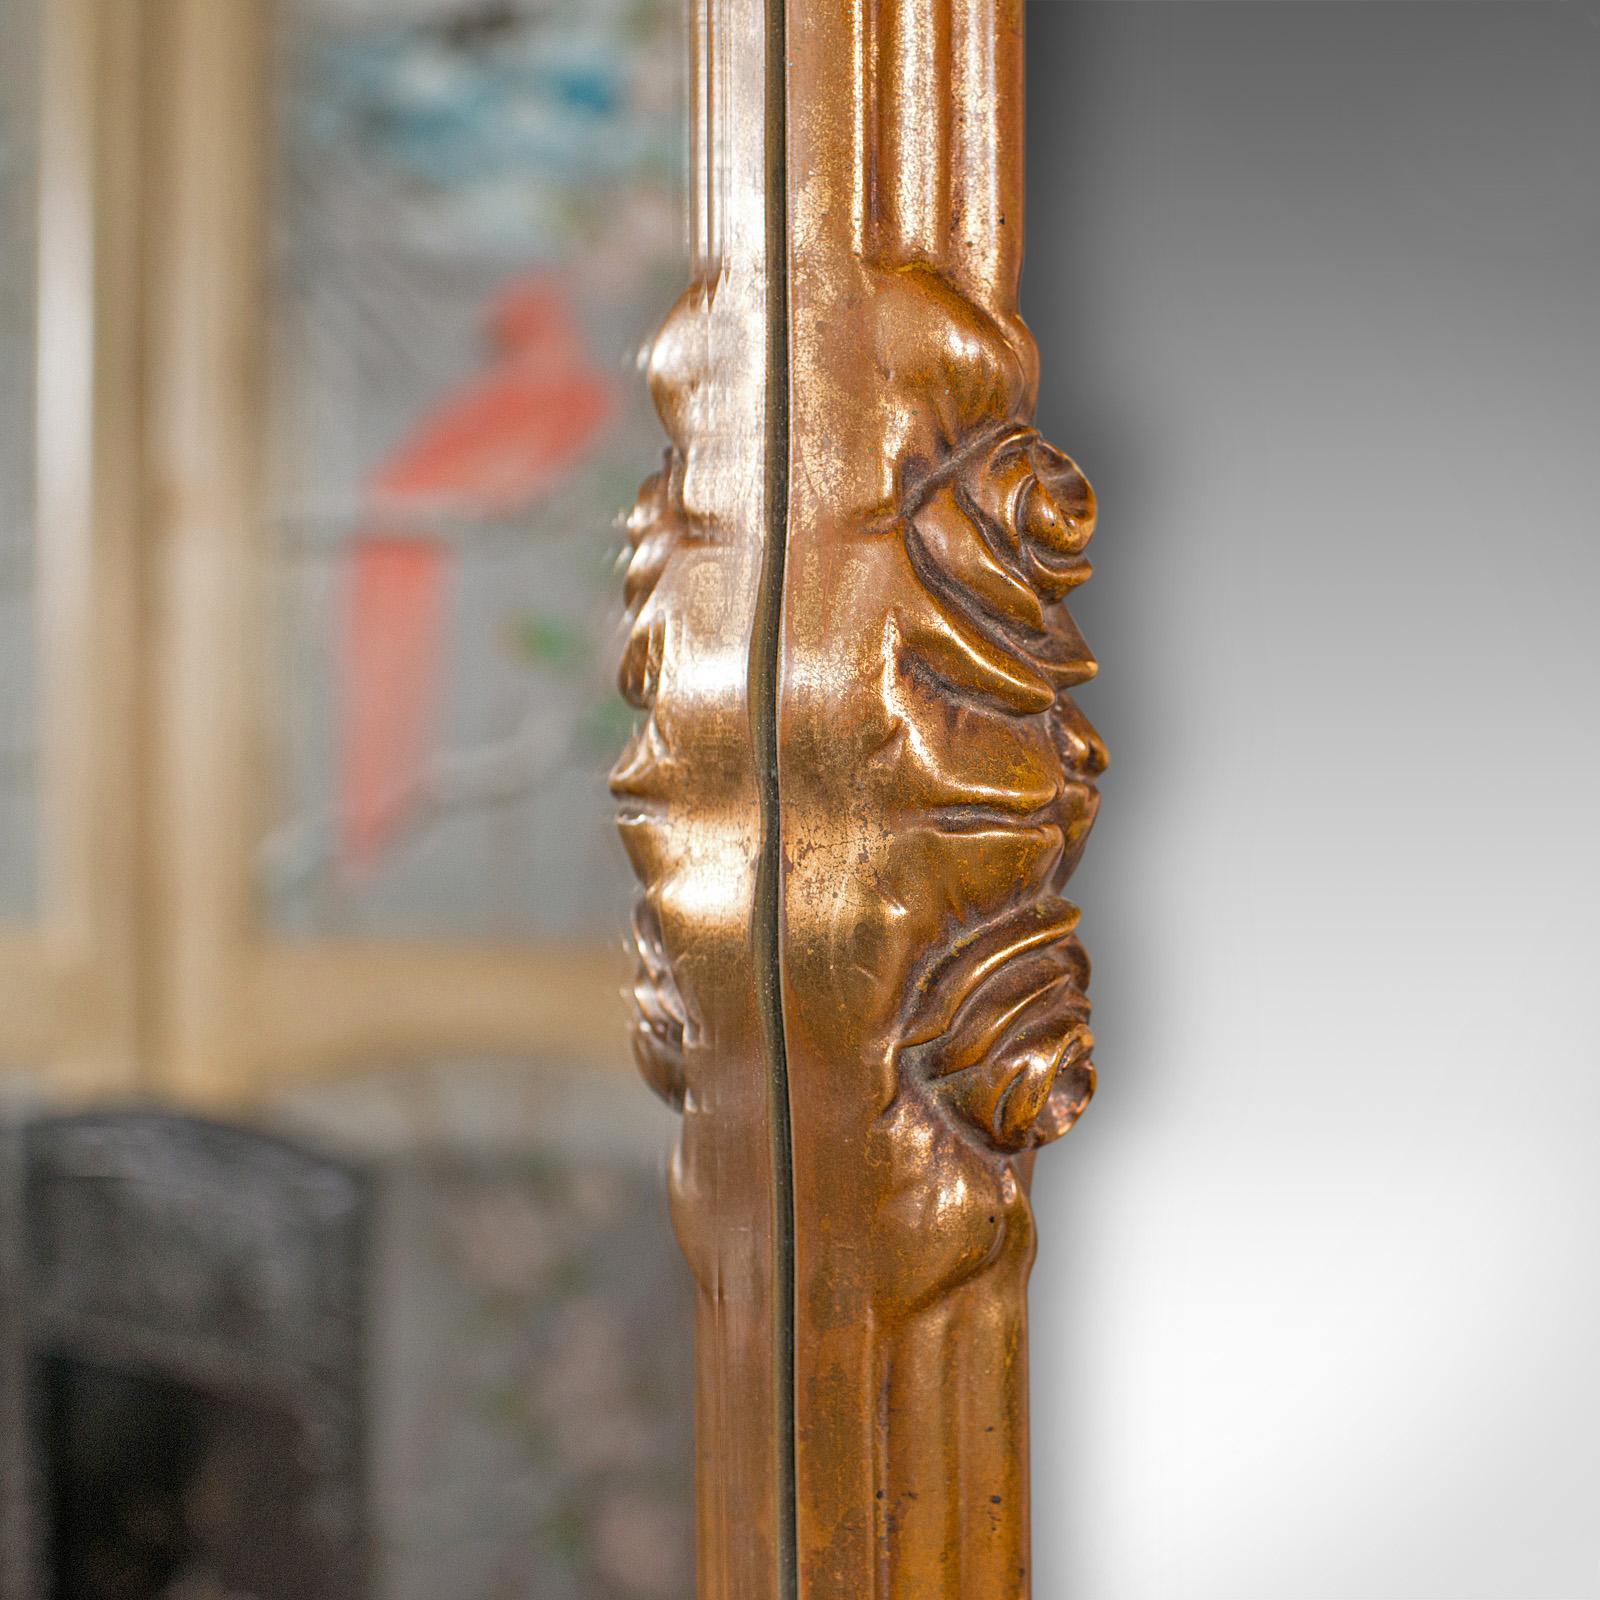 Vintage Wall Mirror, Continental, Gilt, Overmantle, Regency Revival, Late 20th In Good Condition For Sale In Hele, Devon, GB